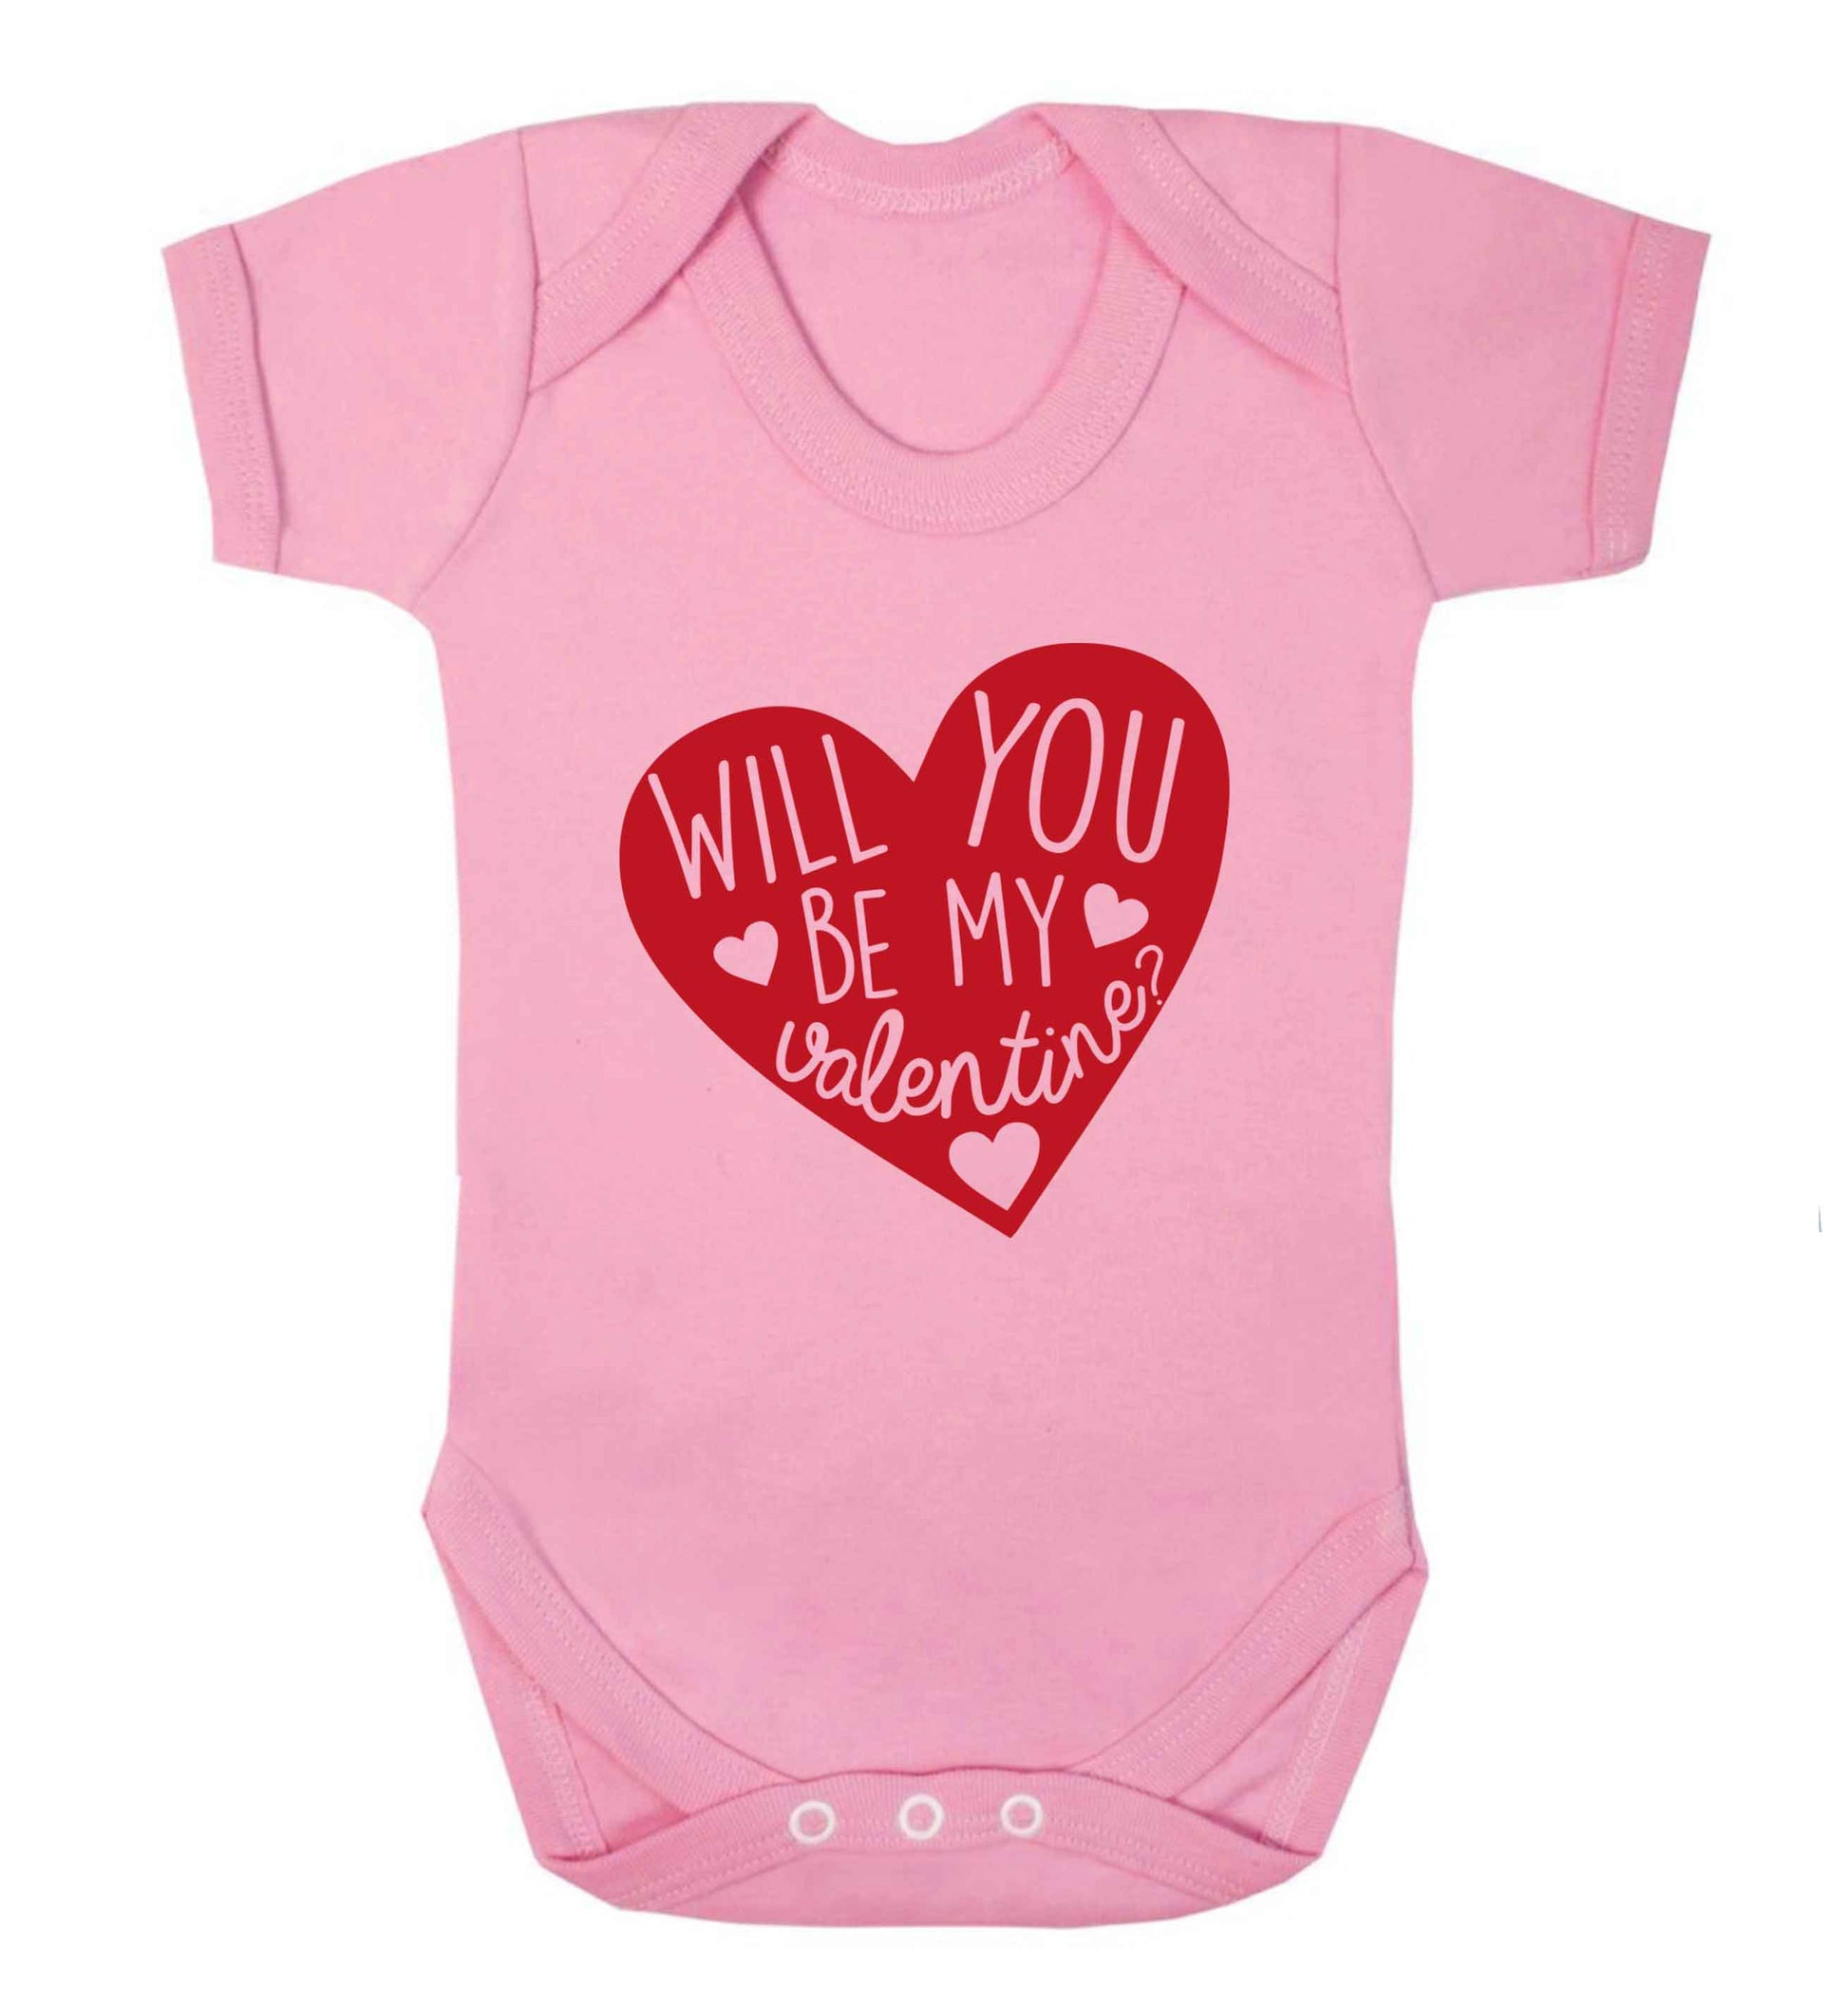 Will you be my valentine? baby vest pale pink 18-24 months